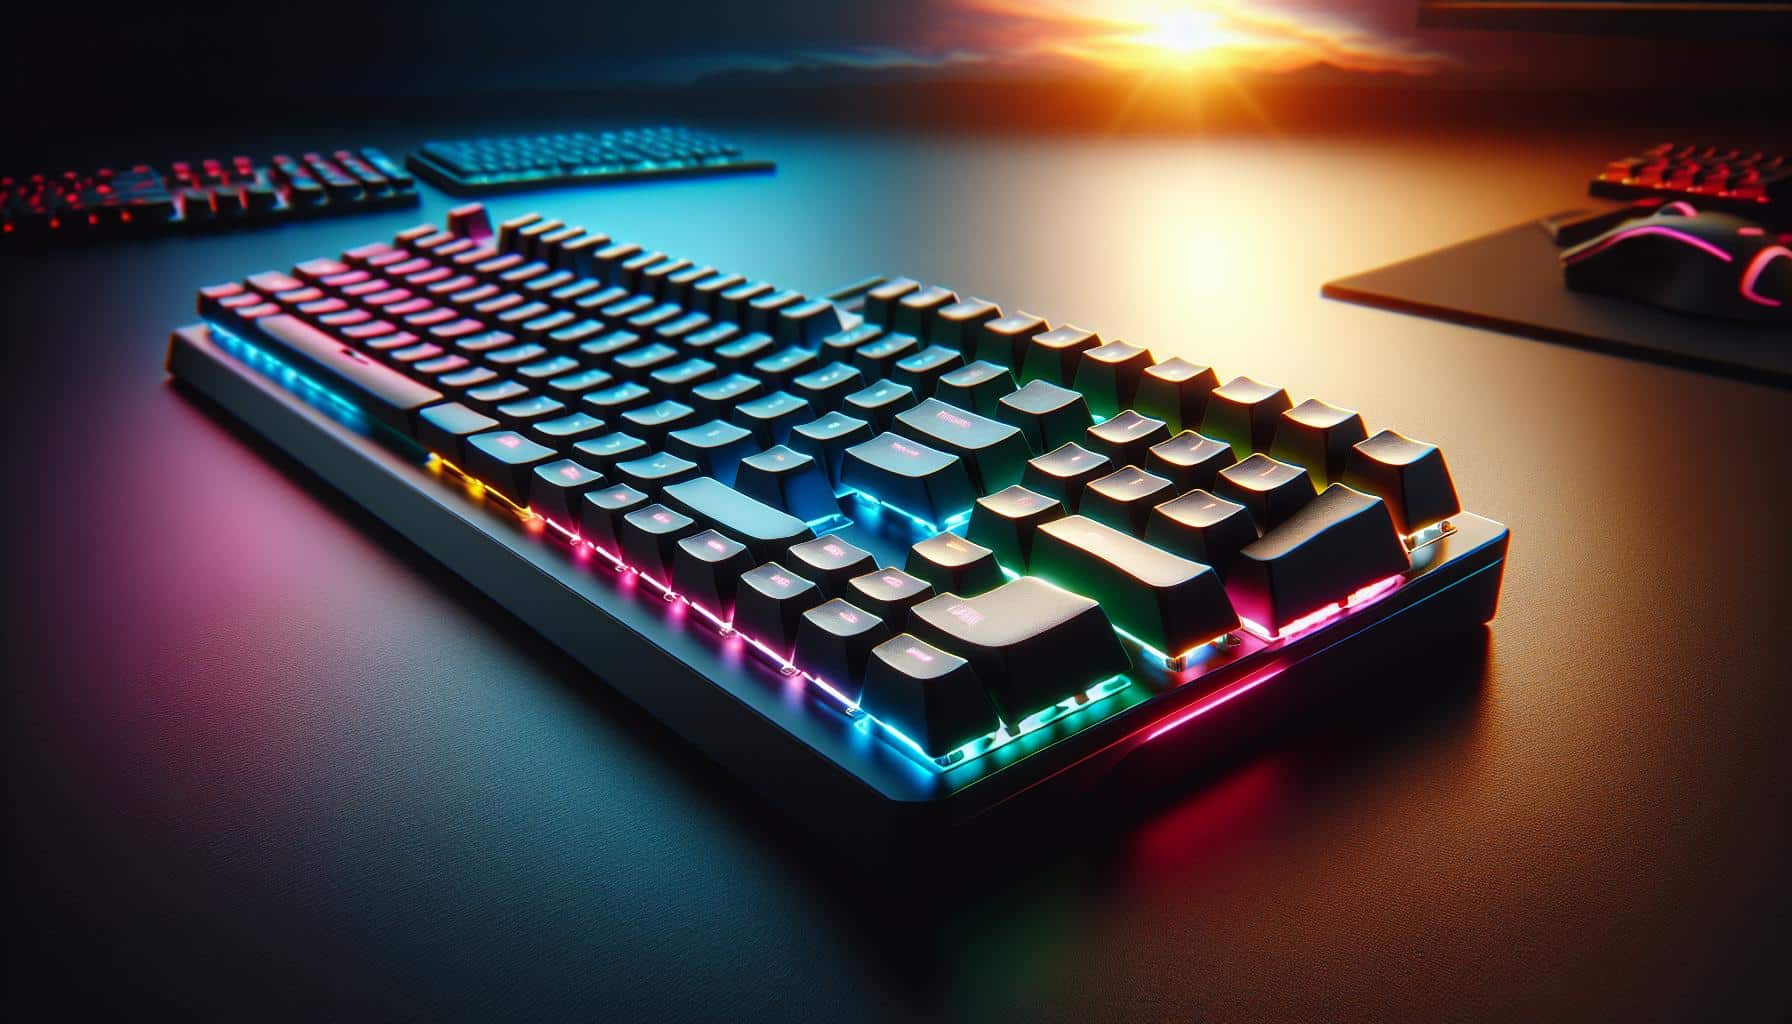 "Corsair K70 CORE SE RGB Mechanical Gaming Keyboard Review: A Comprehensive Analysis of the High-Performance Gaming Keyboard" | FinOracle